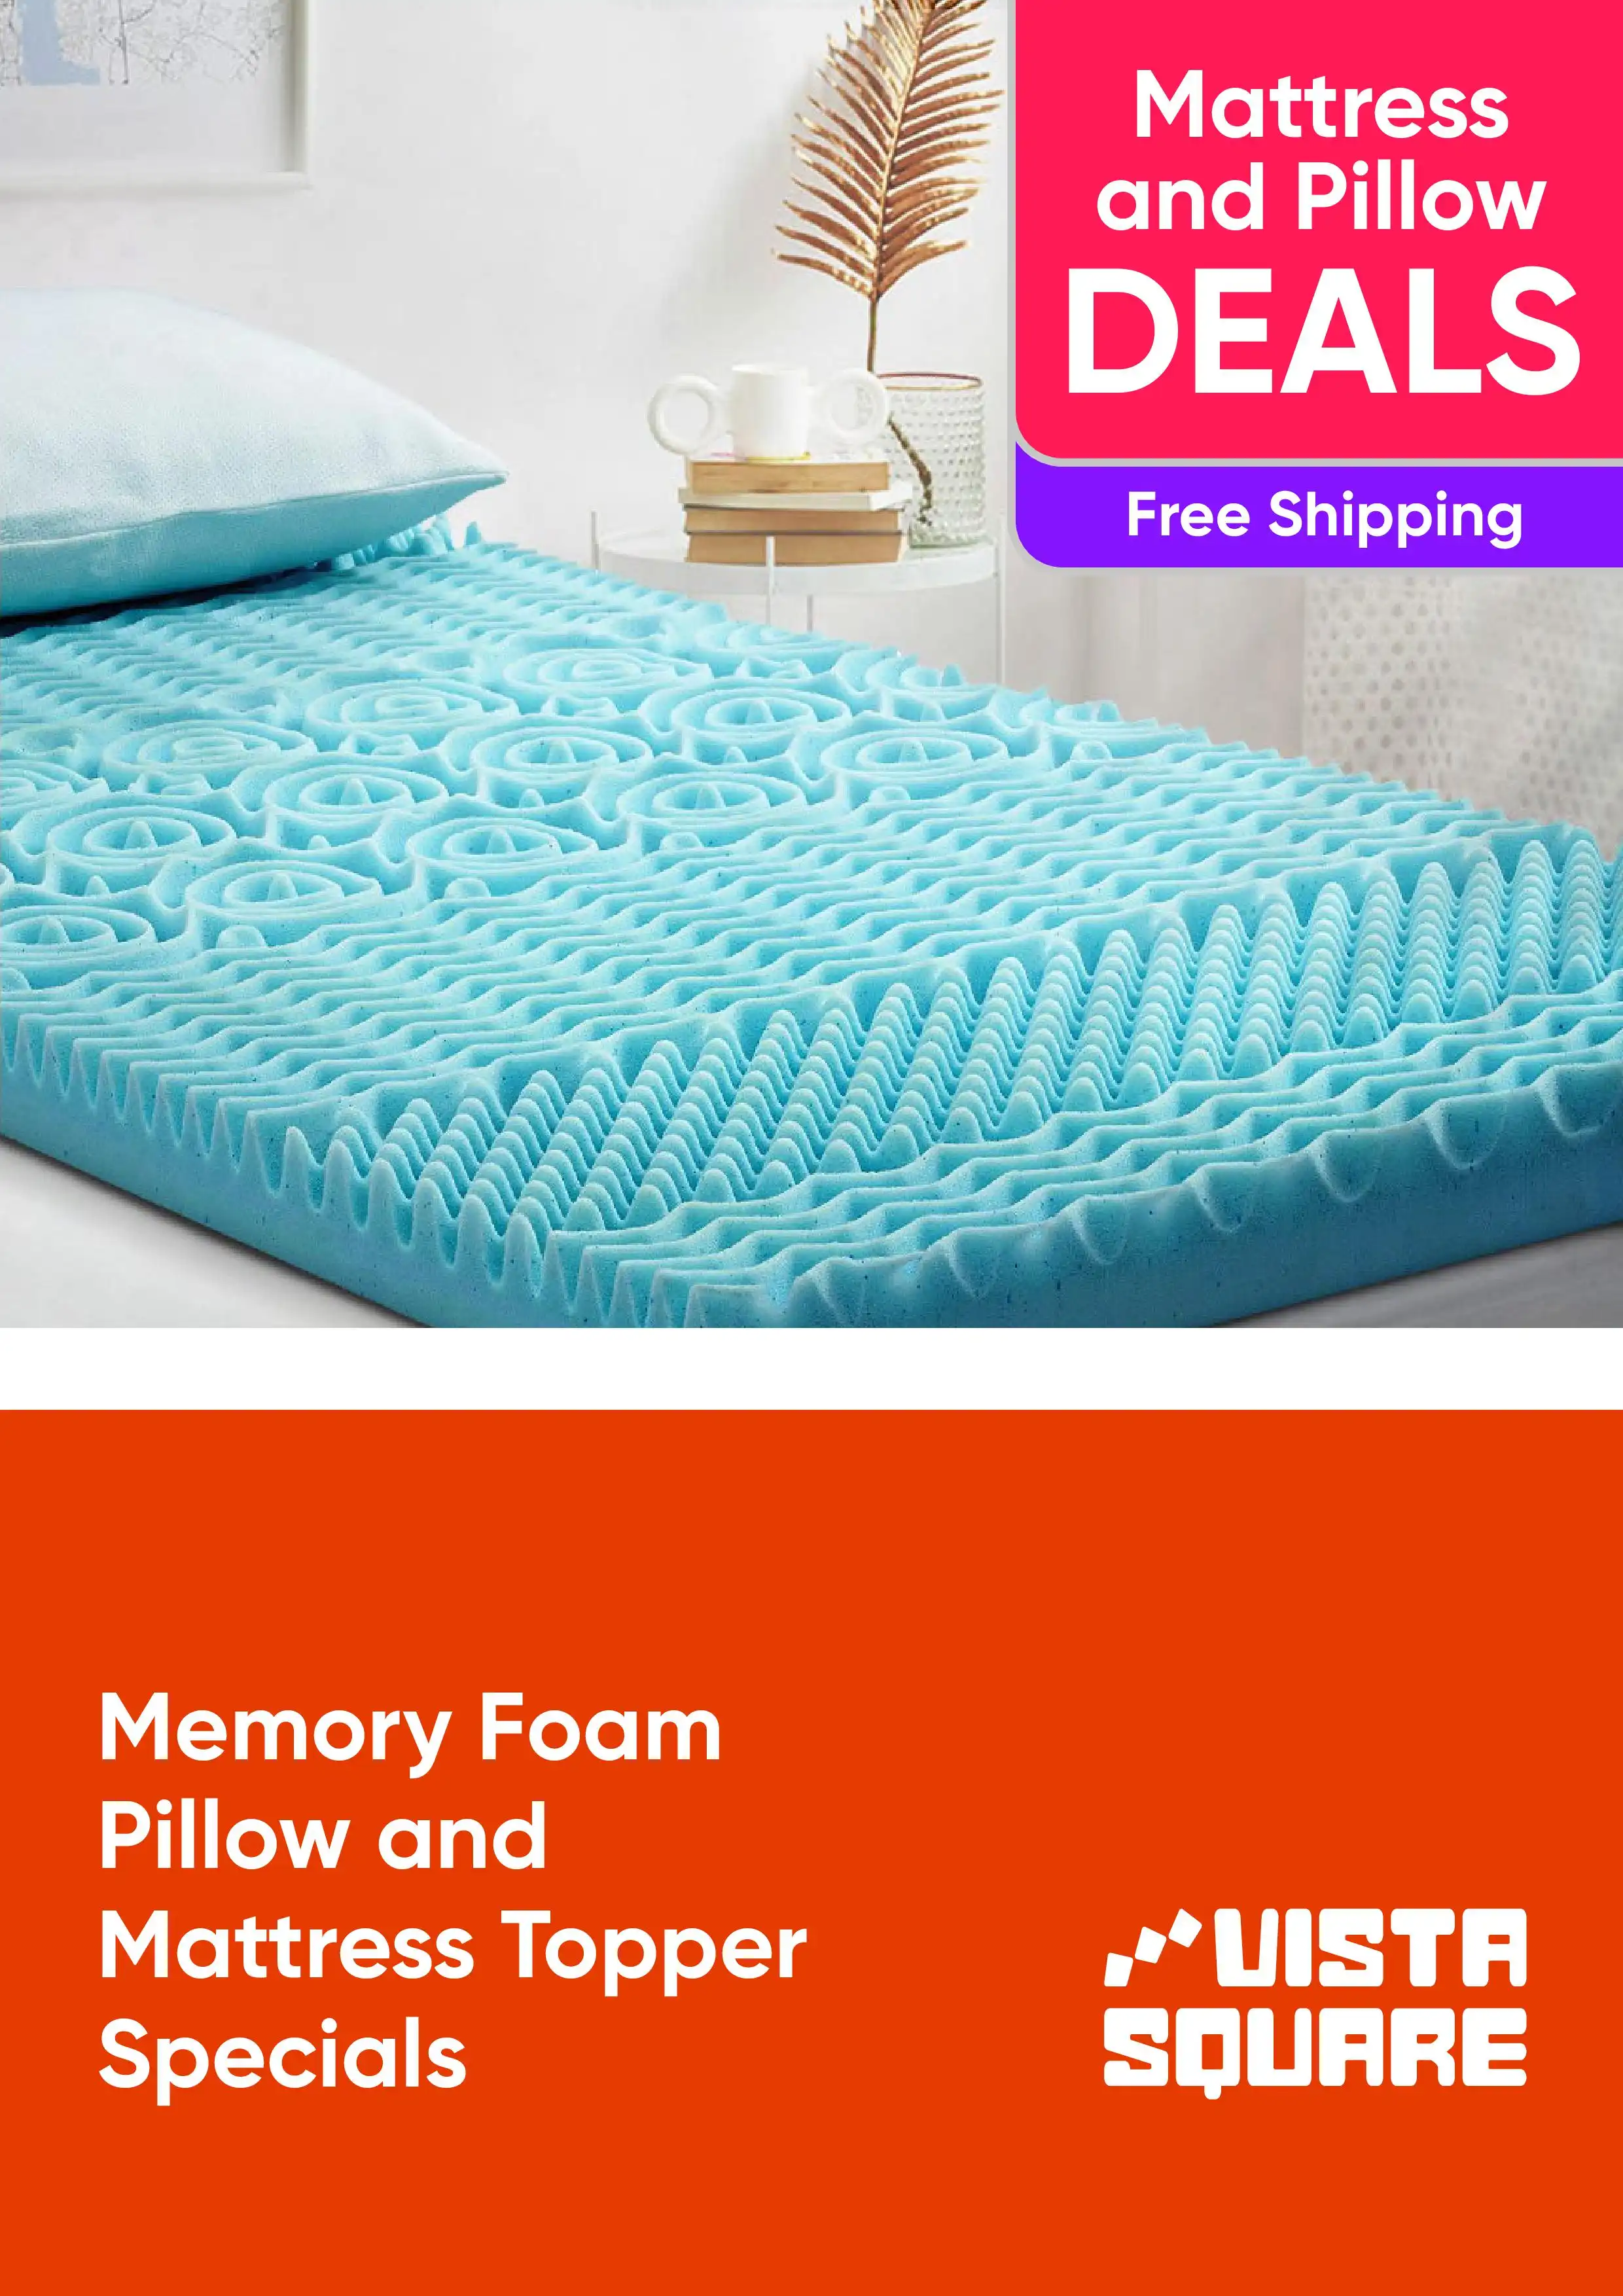 Memory Foam Pillow and Mattress Topper Specials - Free Shipping